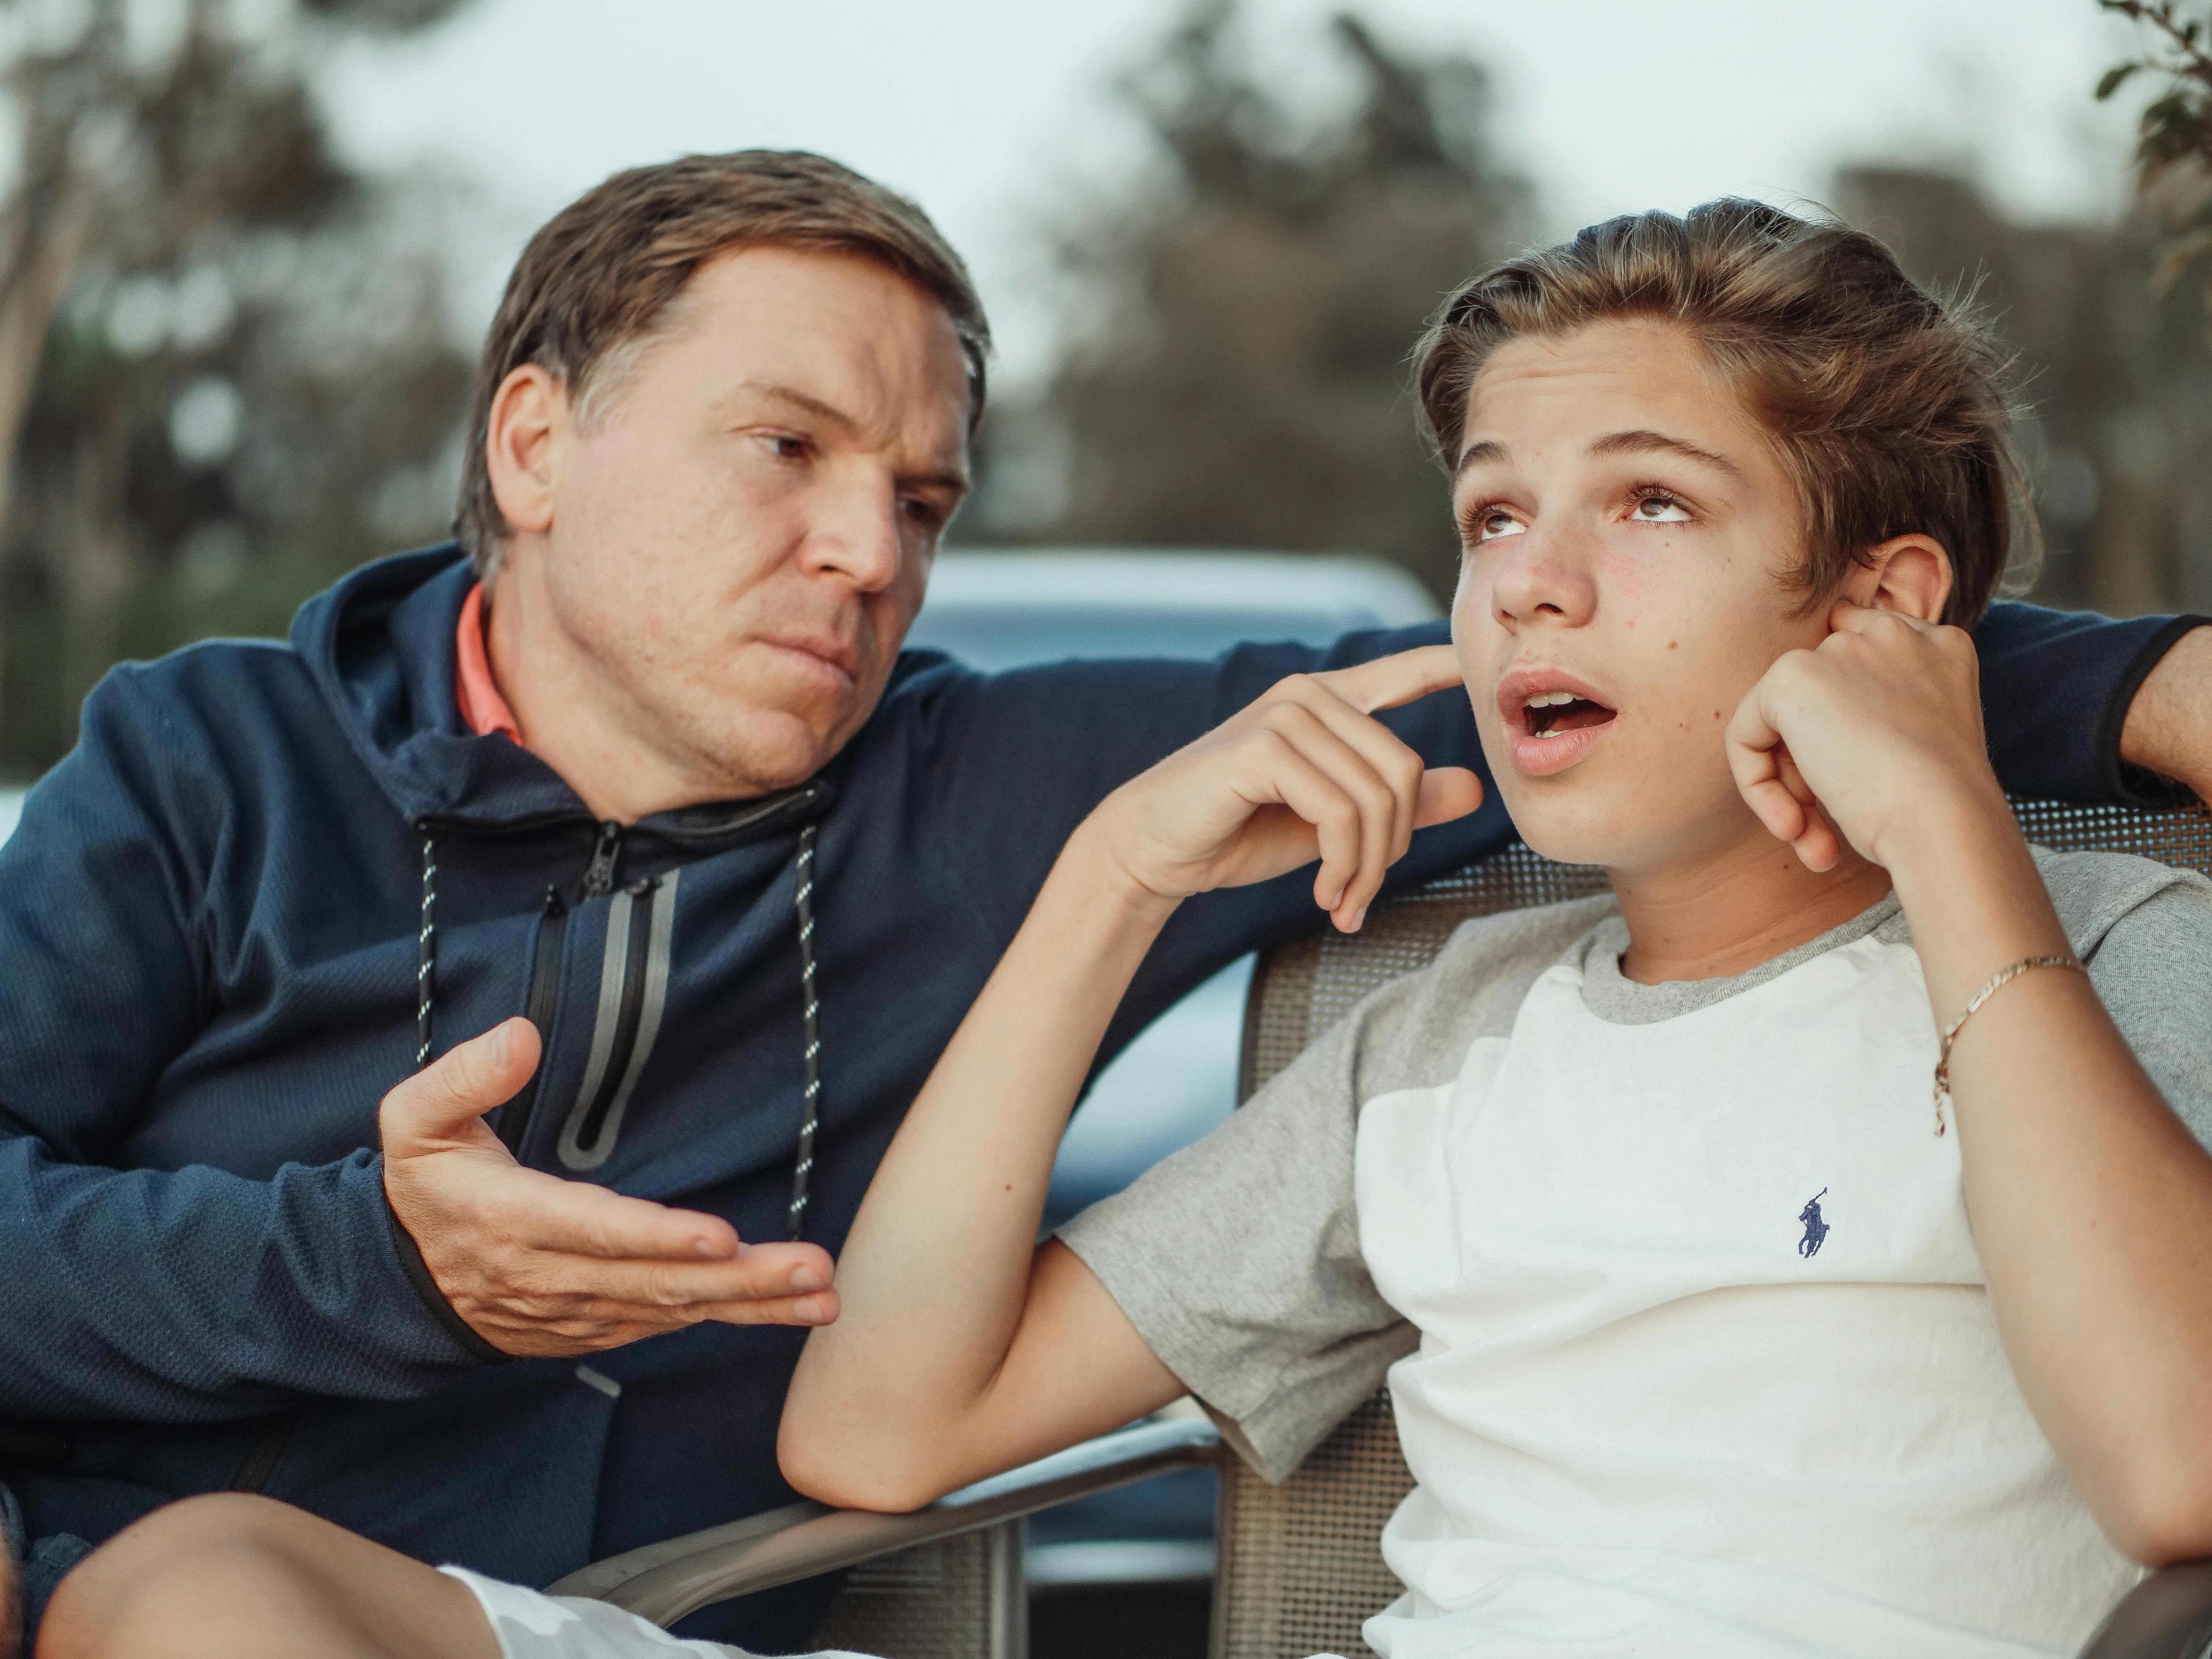 Boy doesn't listen to his father | Source: Pexels